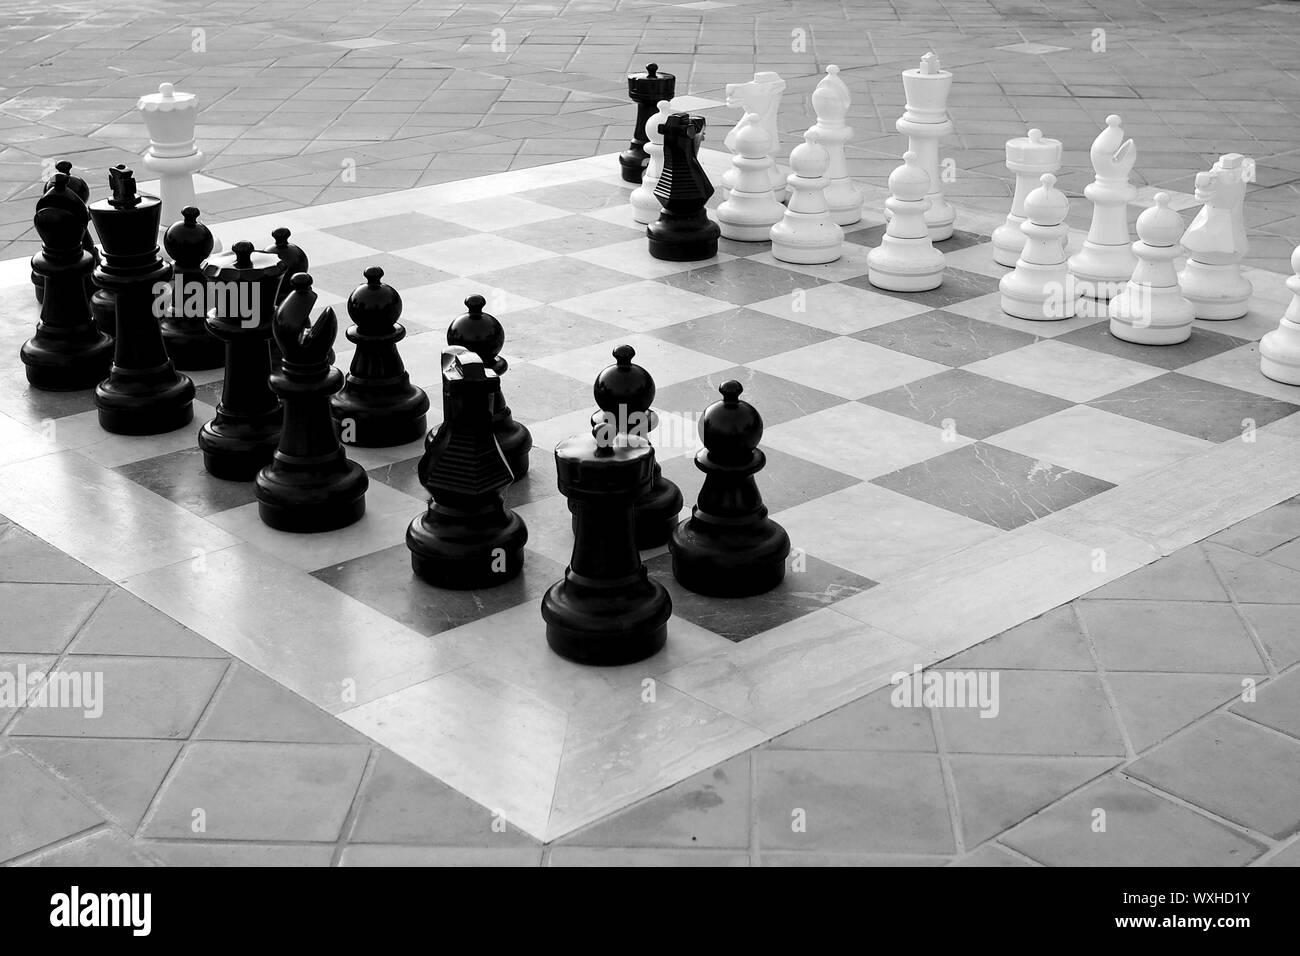 Layout Of A Chess Board In Black And White With Whites First Move